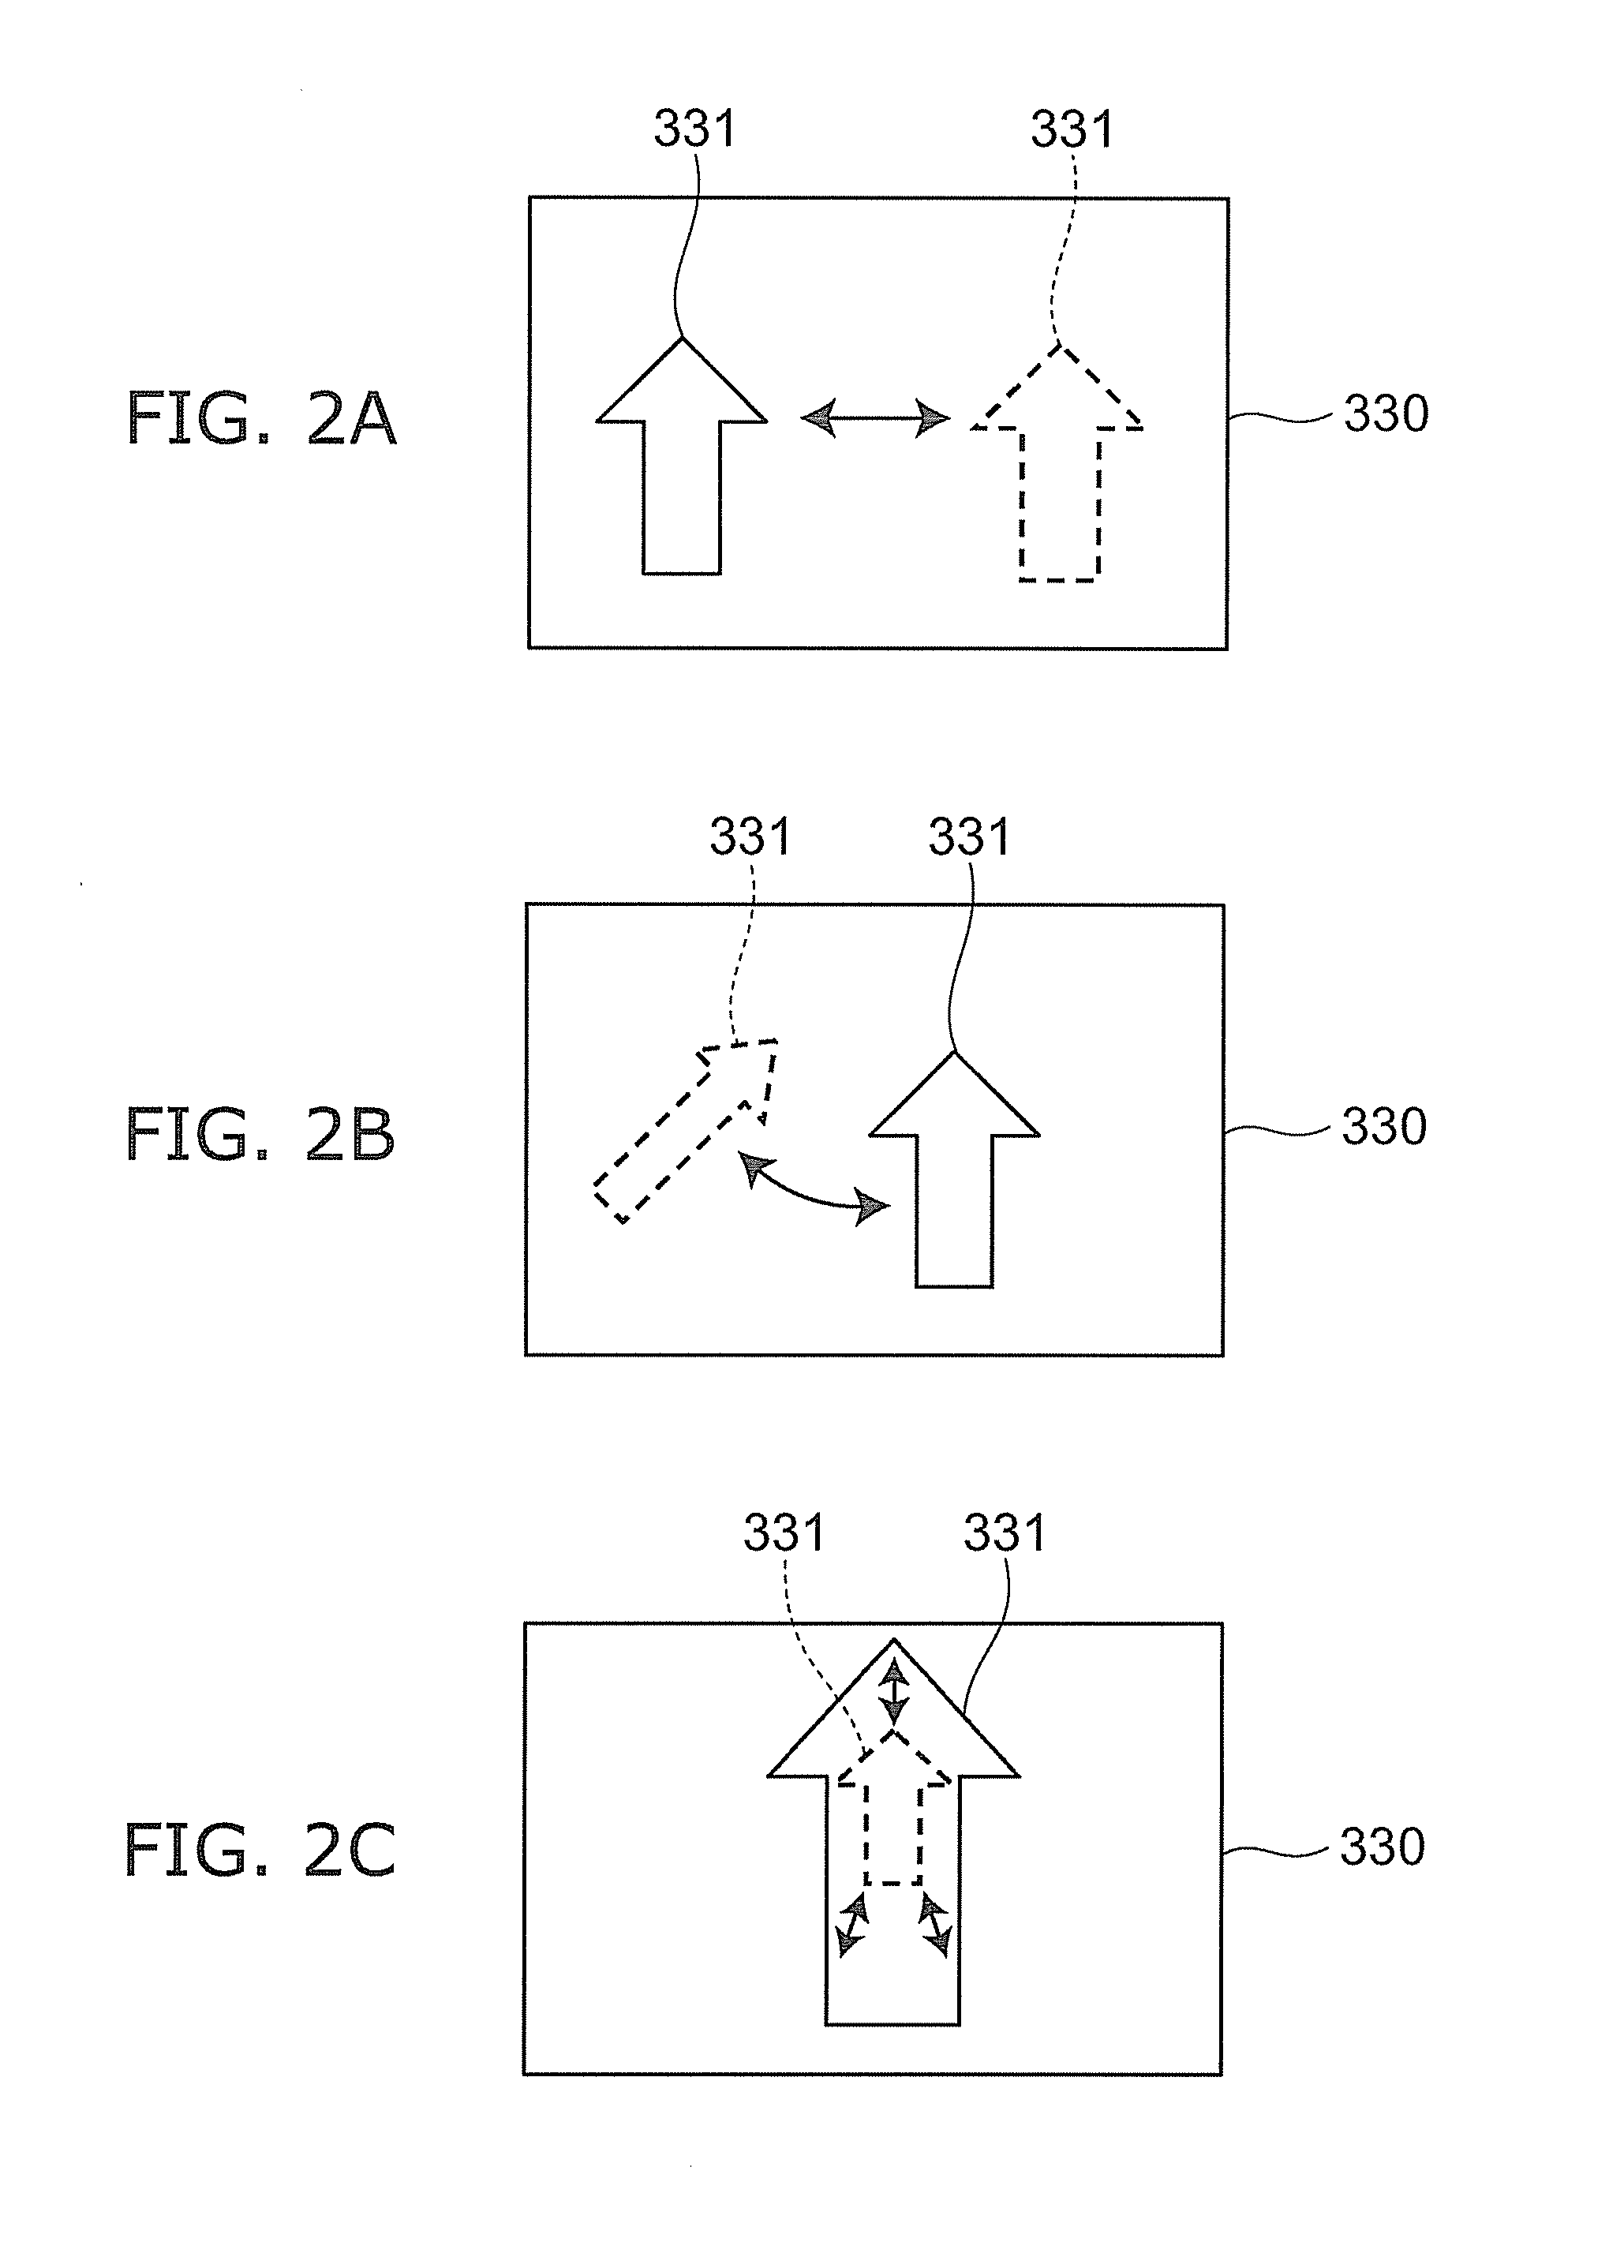 Display apparatus for vehicle and display method